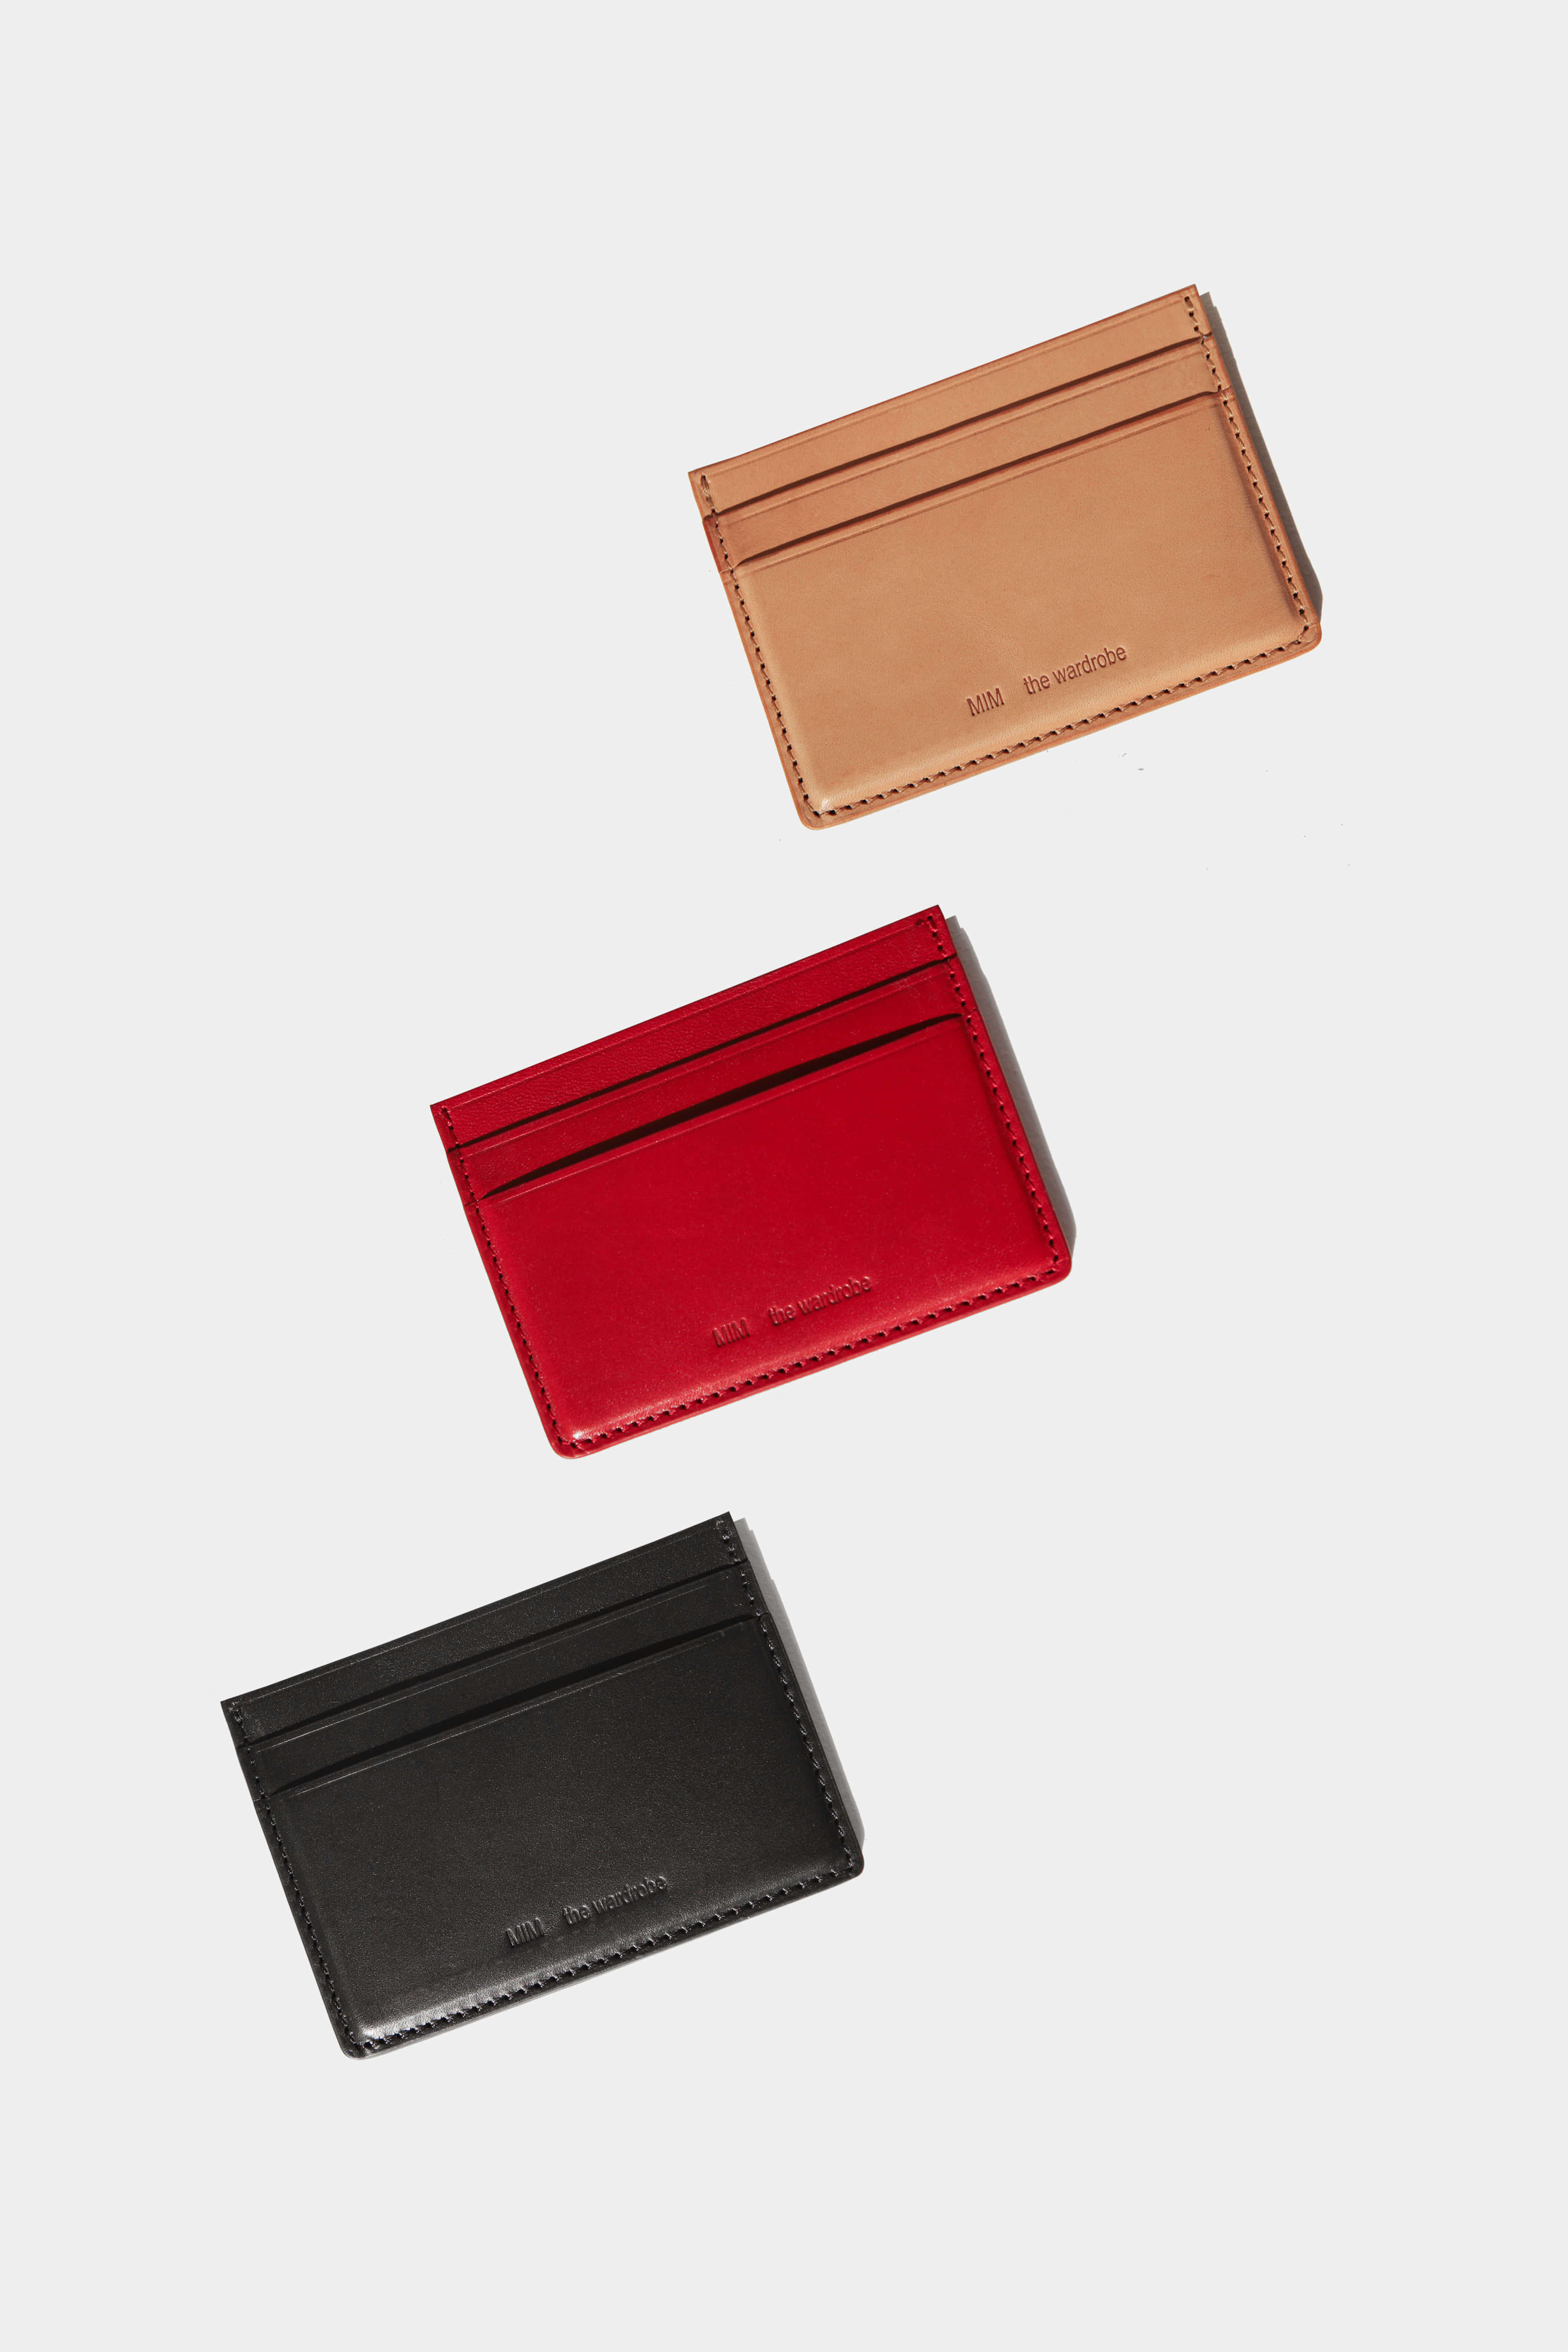 THE WARDROBE Vegetable Leather Card Wallet